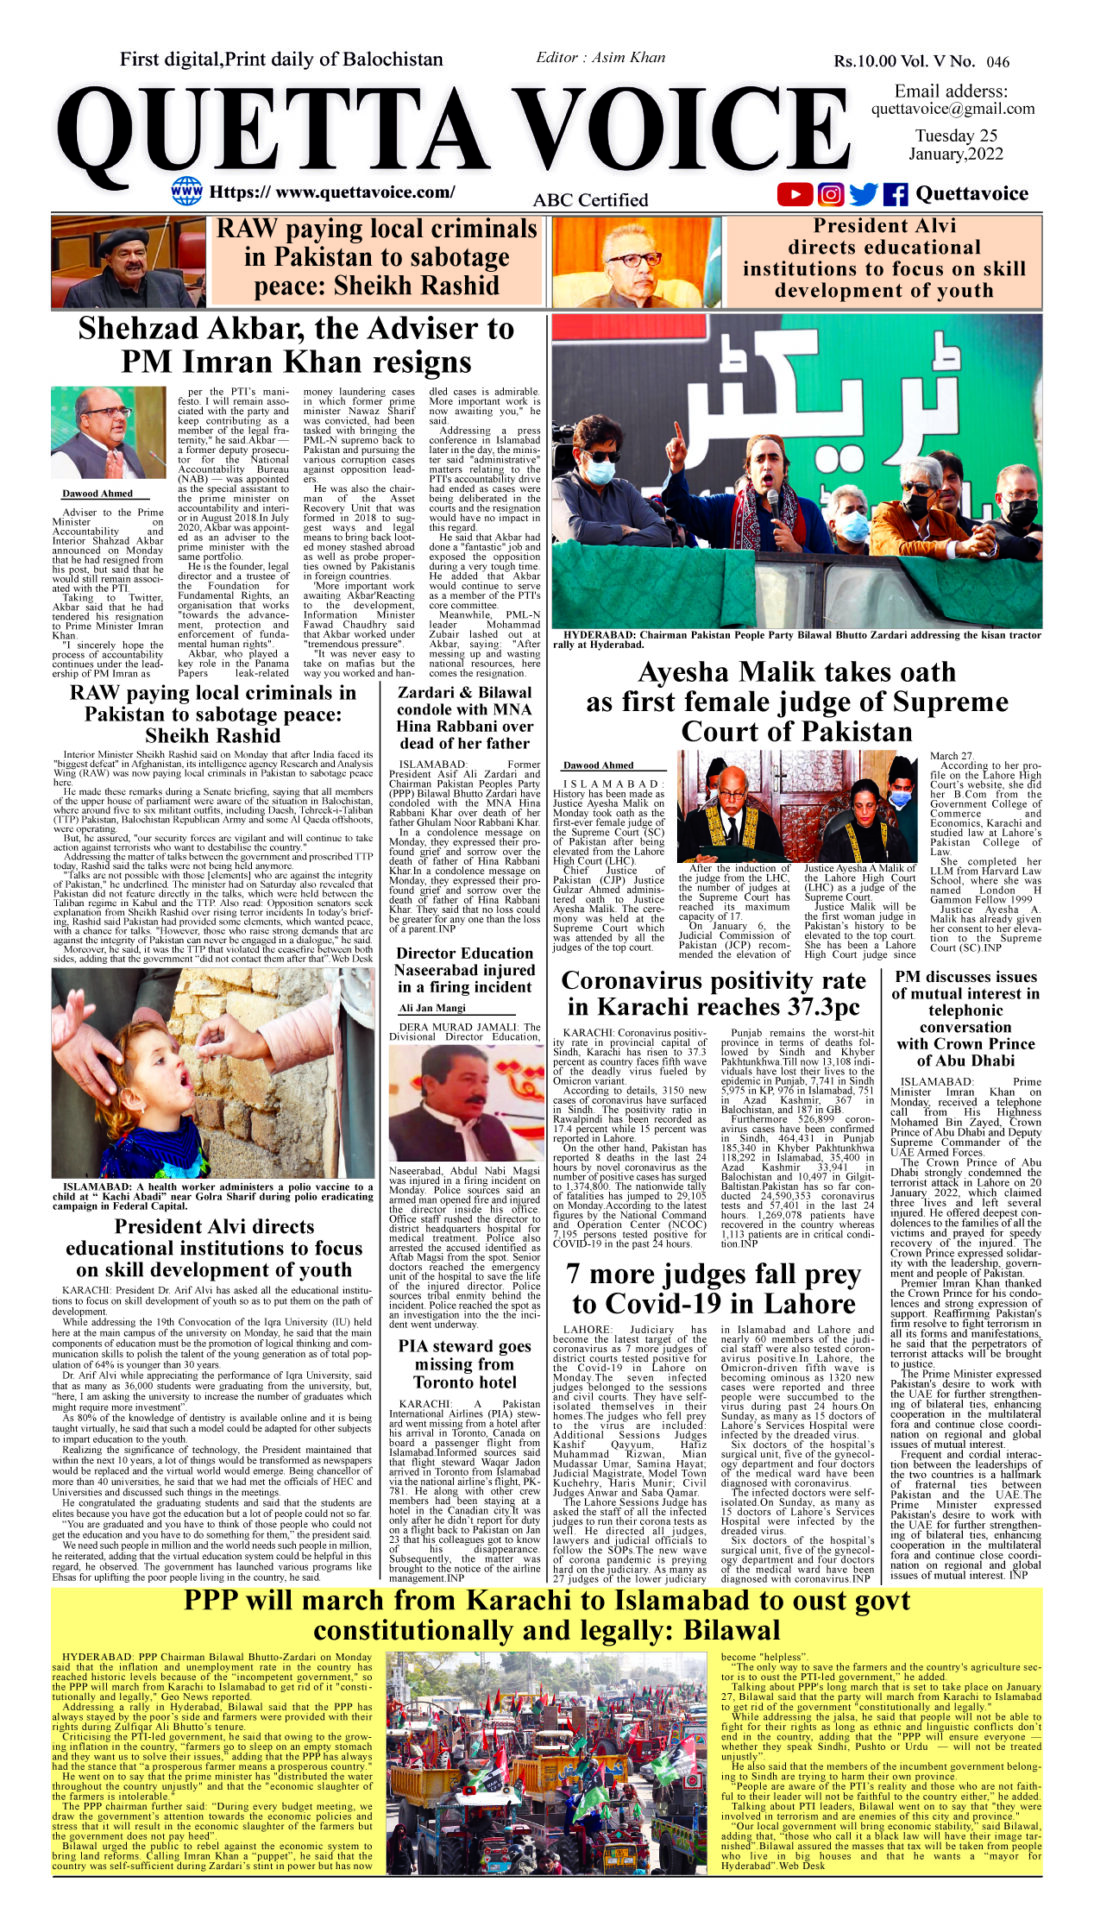 Today's Quetta Voice Newspaper, Tuesday, January 25, 2022